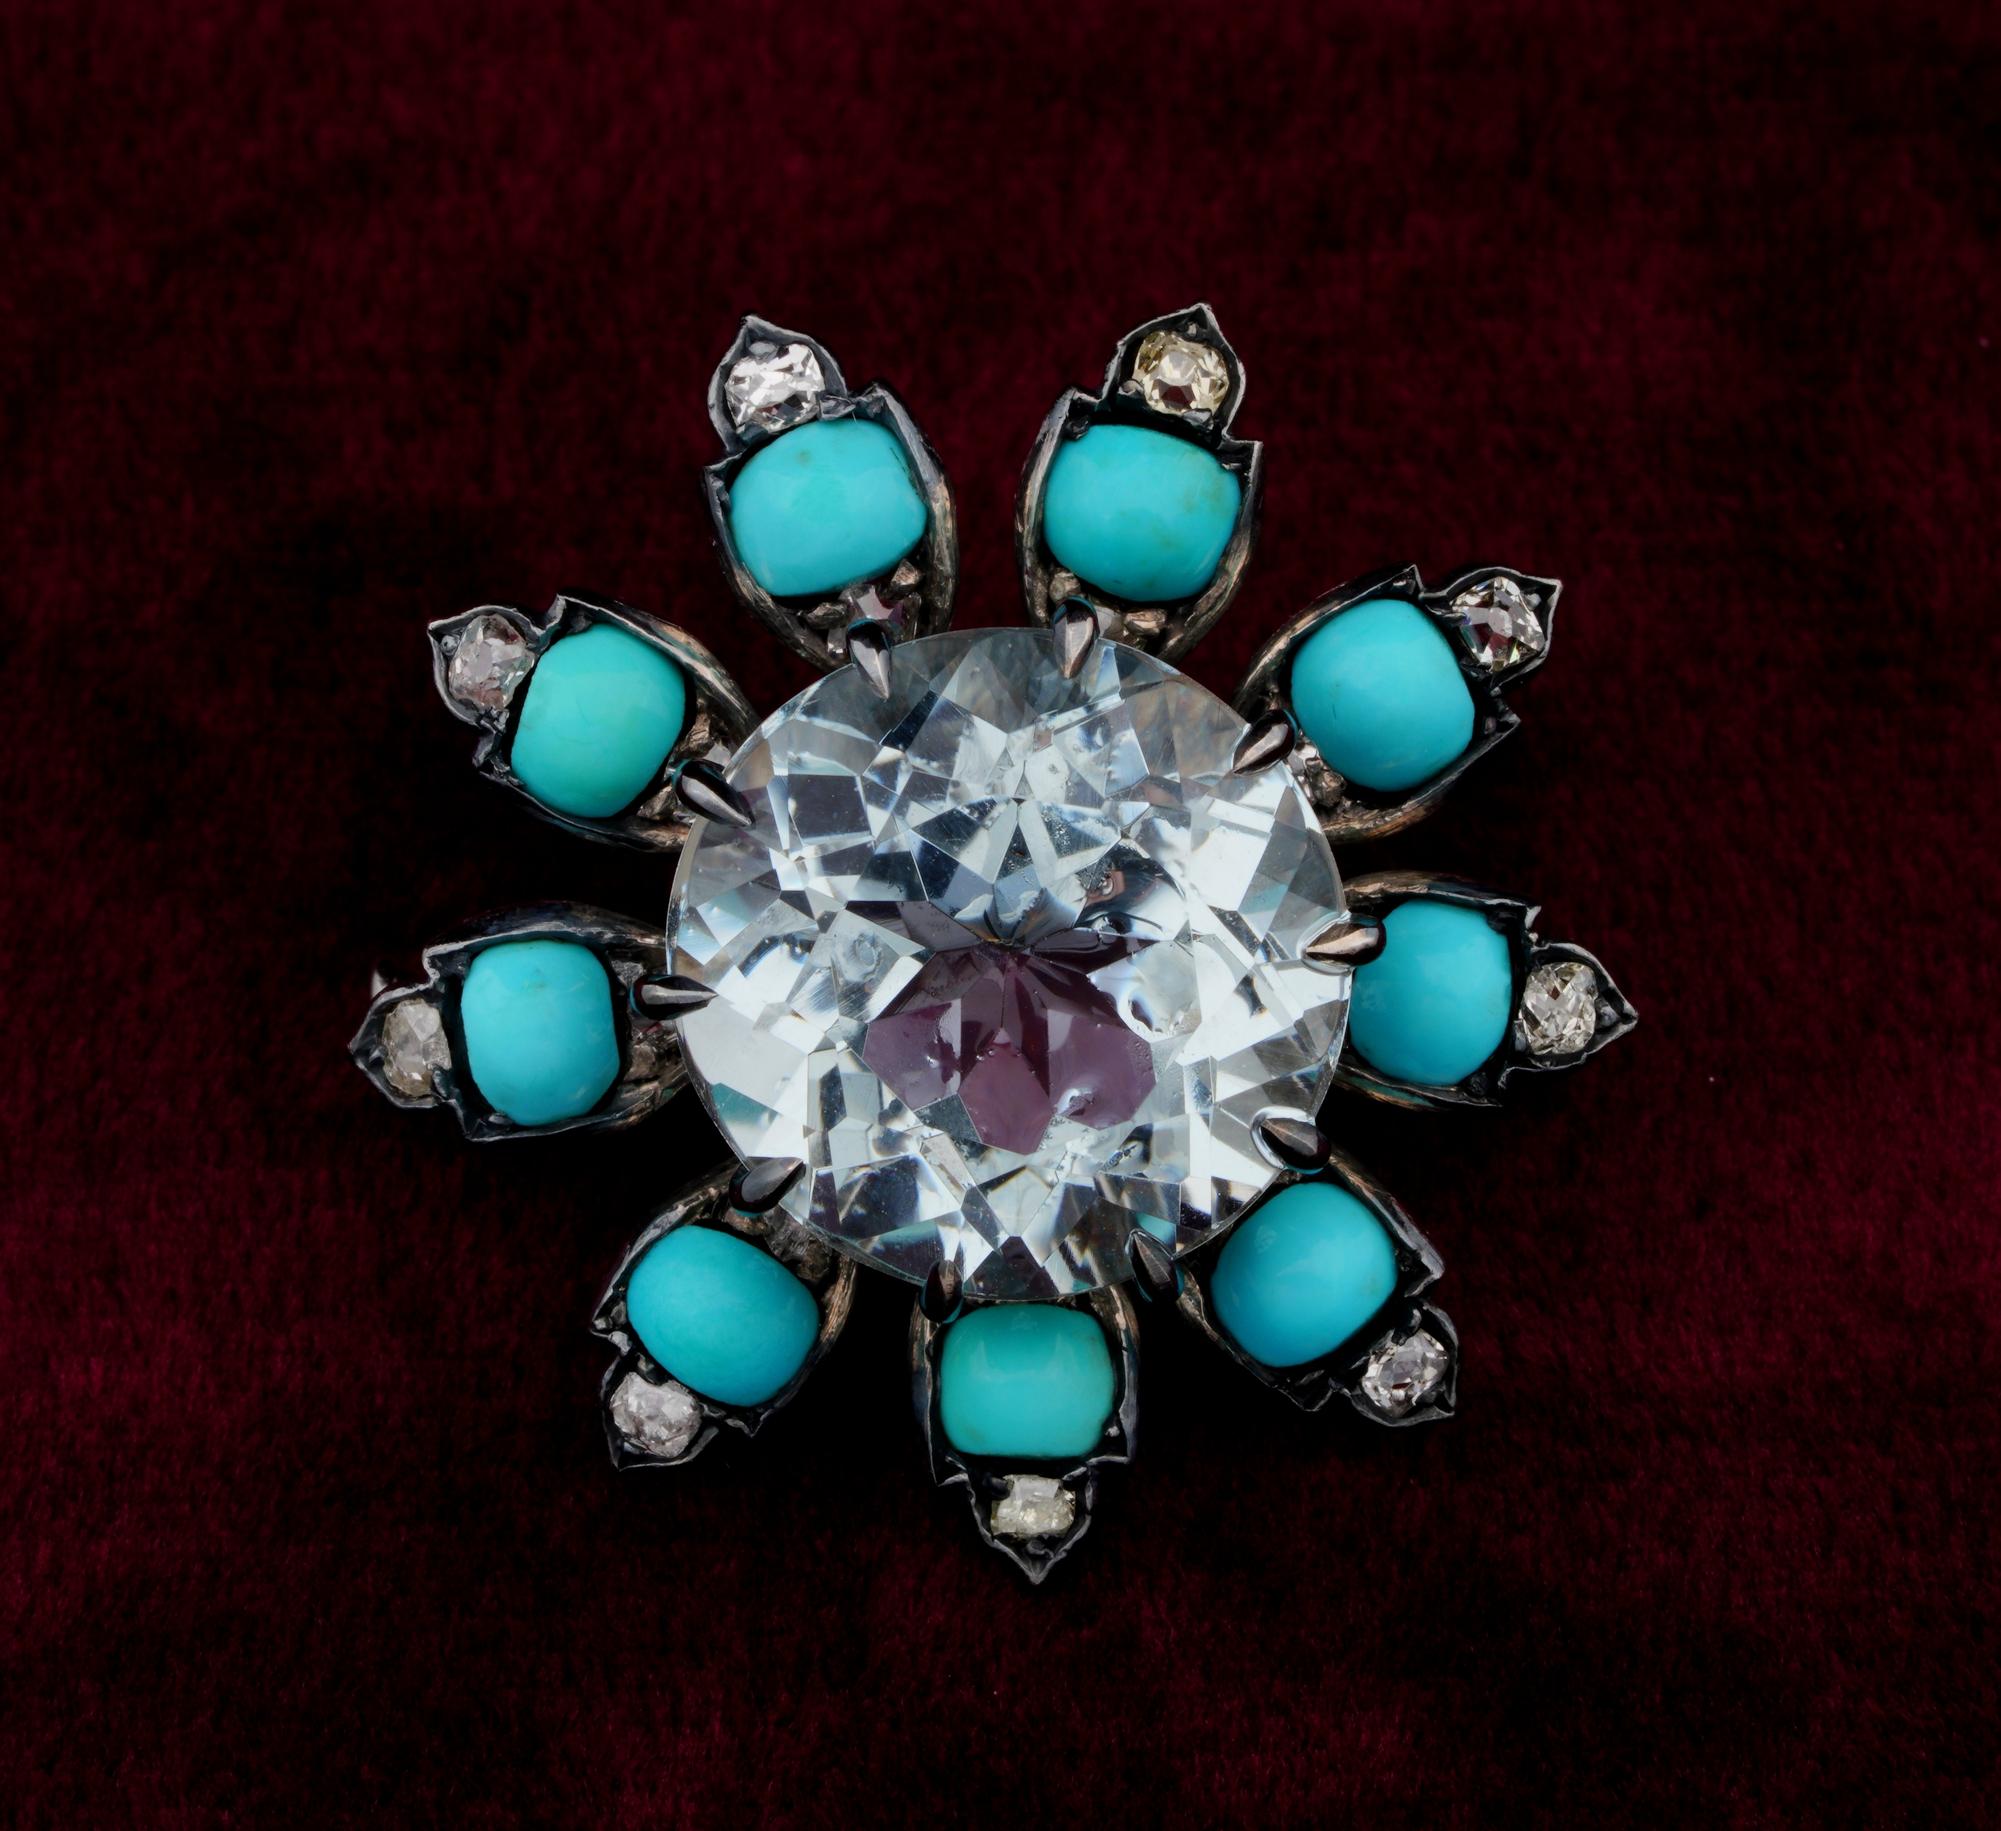 Victorian Bloom

Bold, distinctive, rare combination of natural earth mined gemstones making this distinctive Victorian brooch quite an unique
Ageless, favourite nature inspired motif of flower, entirely hand crafted of sterling silver
The heart of